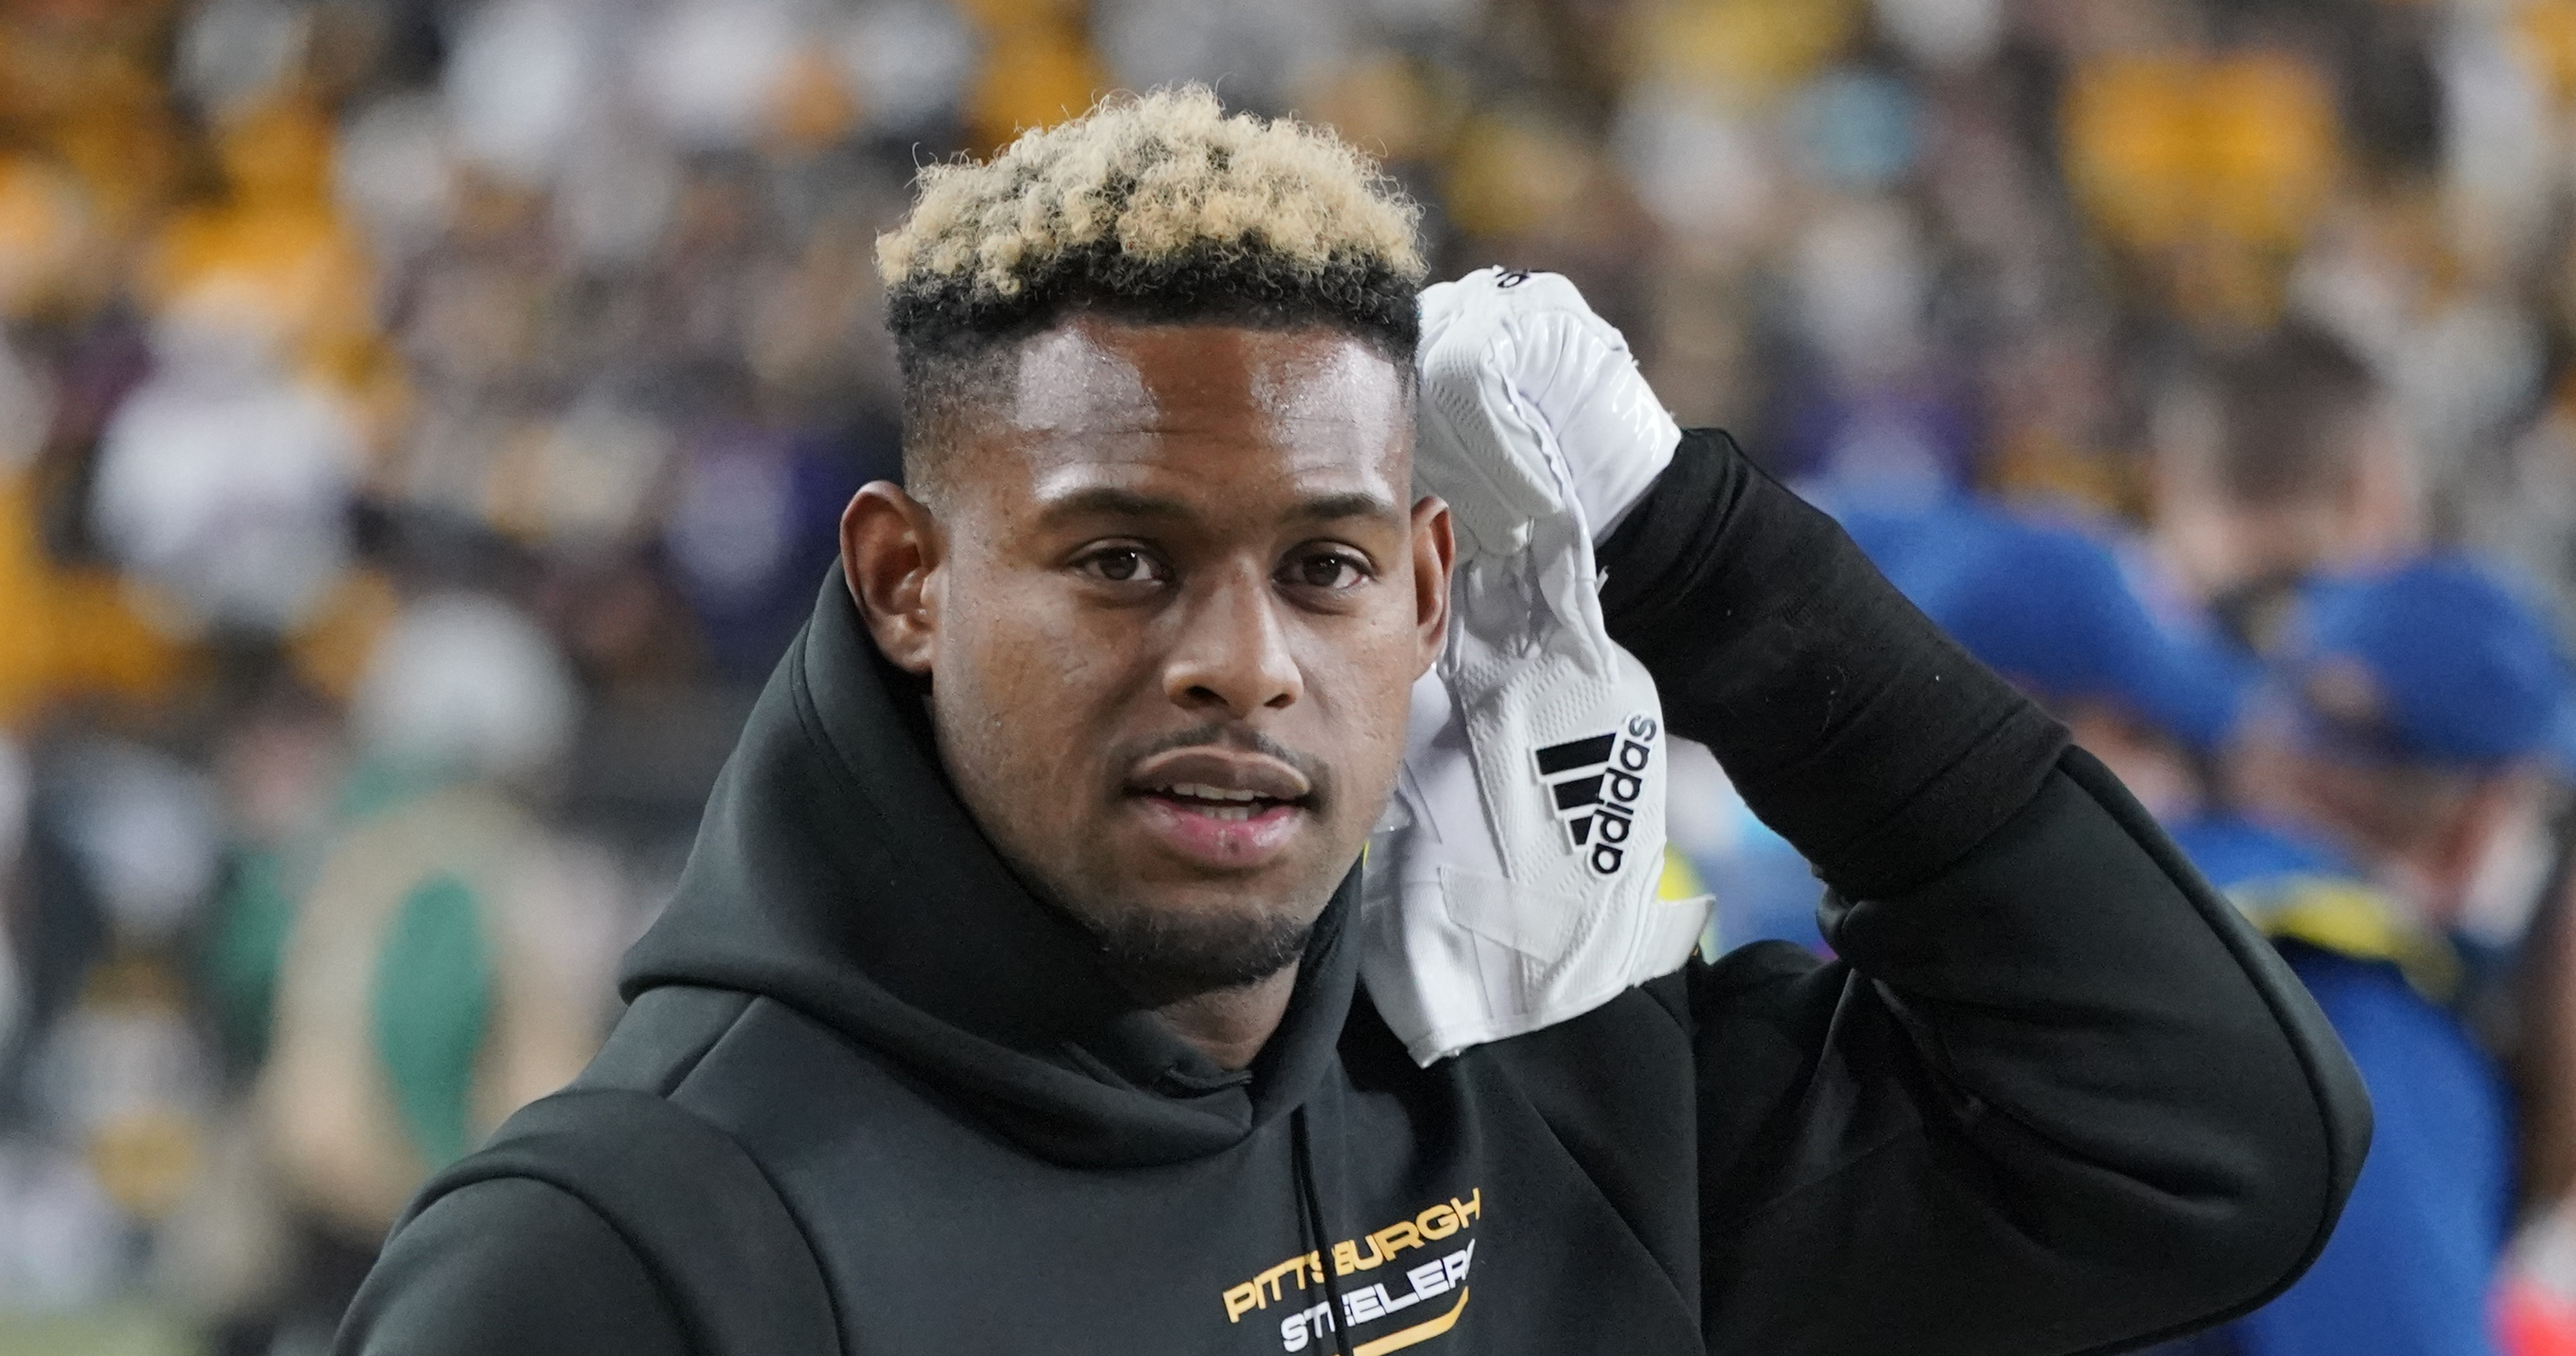 Steelers' Juju Smith-Schuster Activated Off Ir, Expected To Play Vs